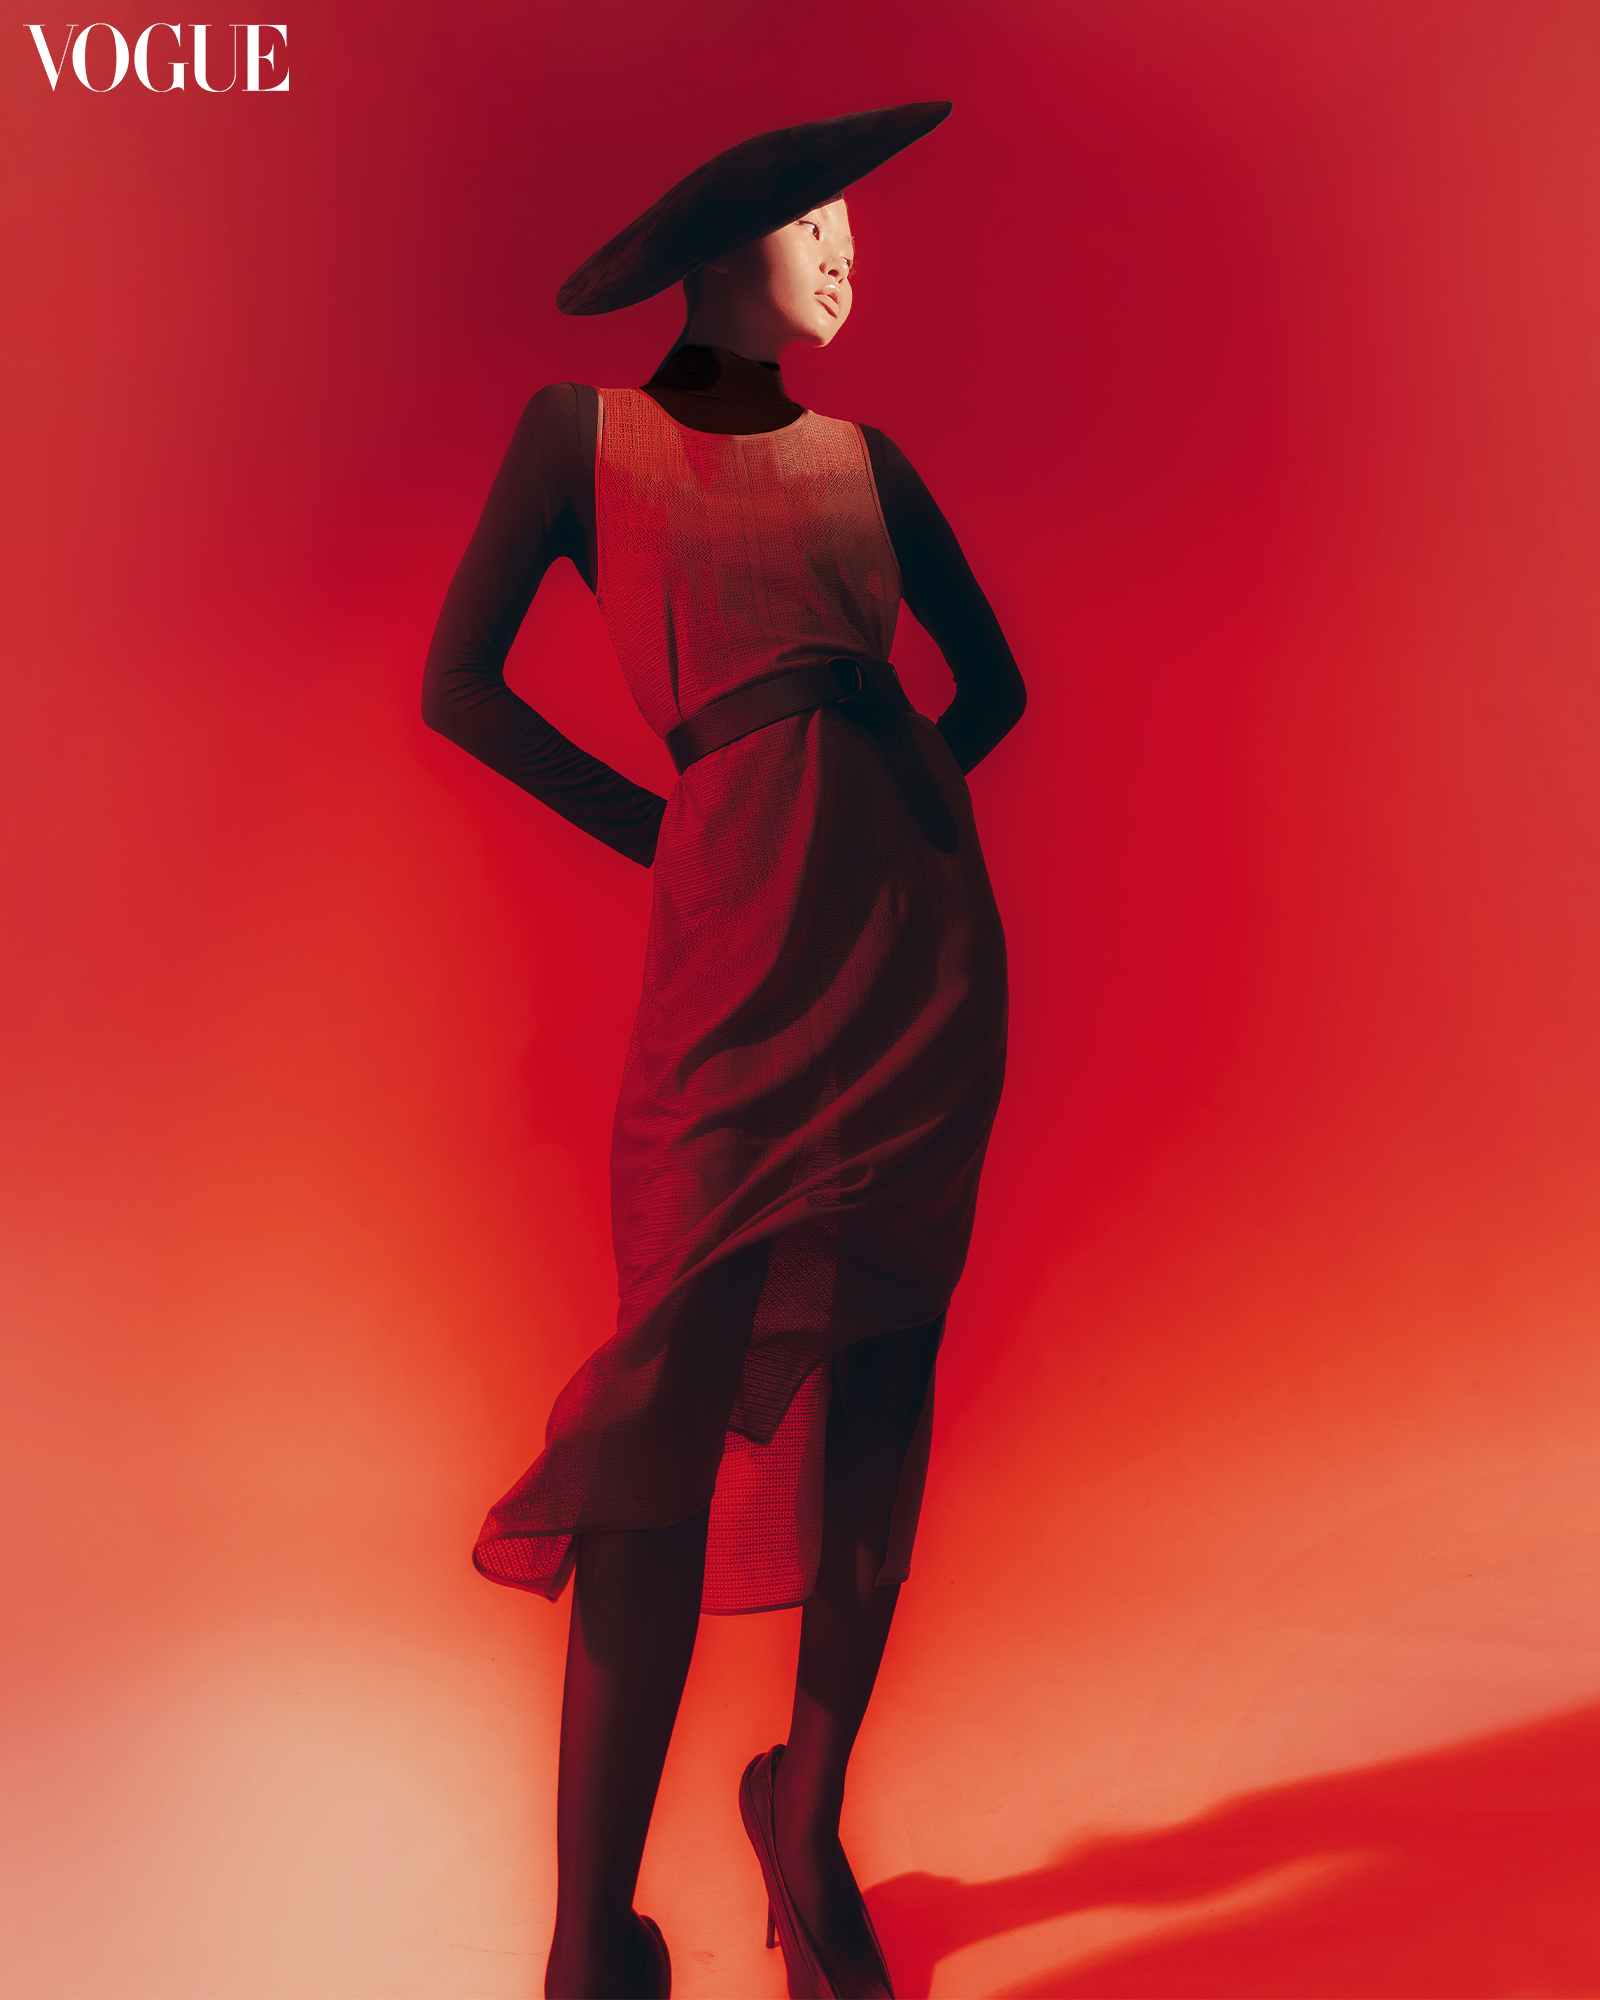 A woman in a red dress and black hat